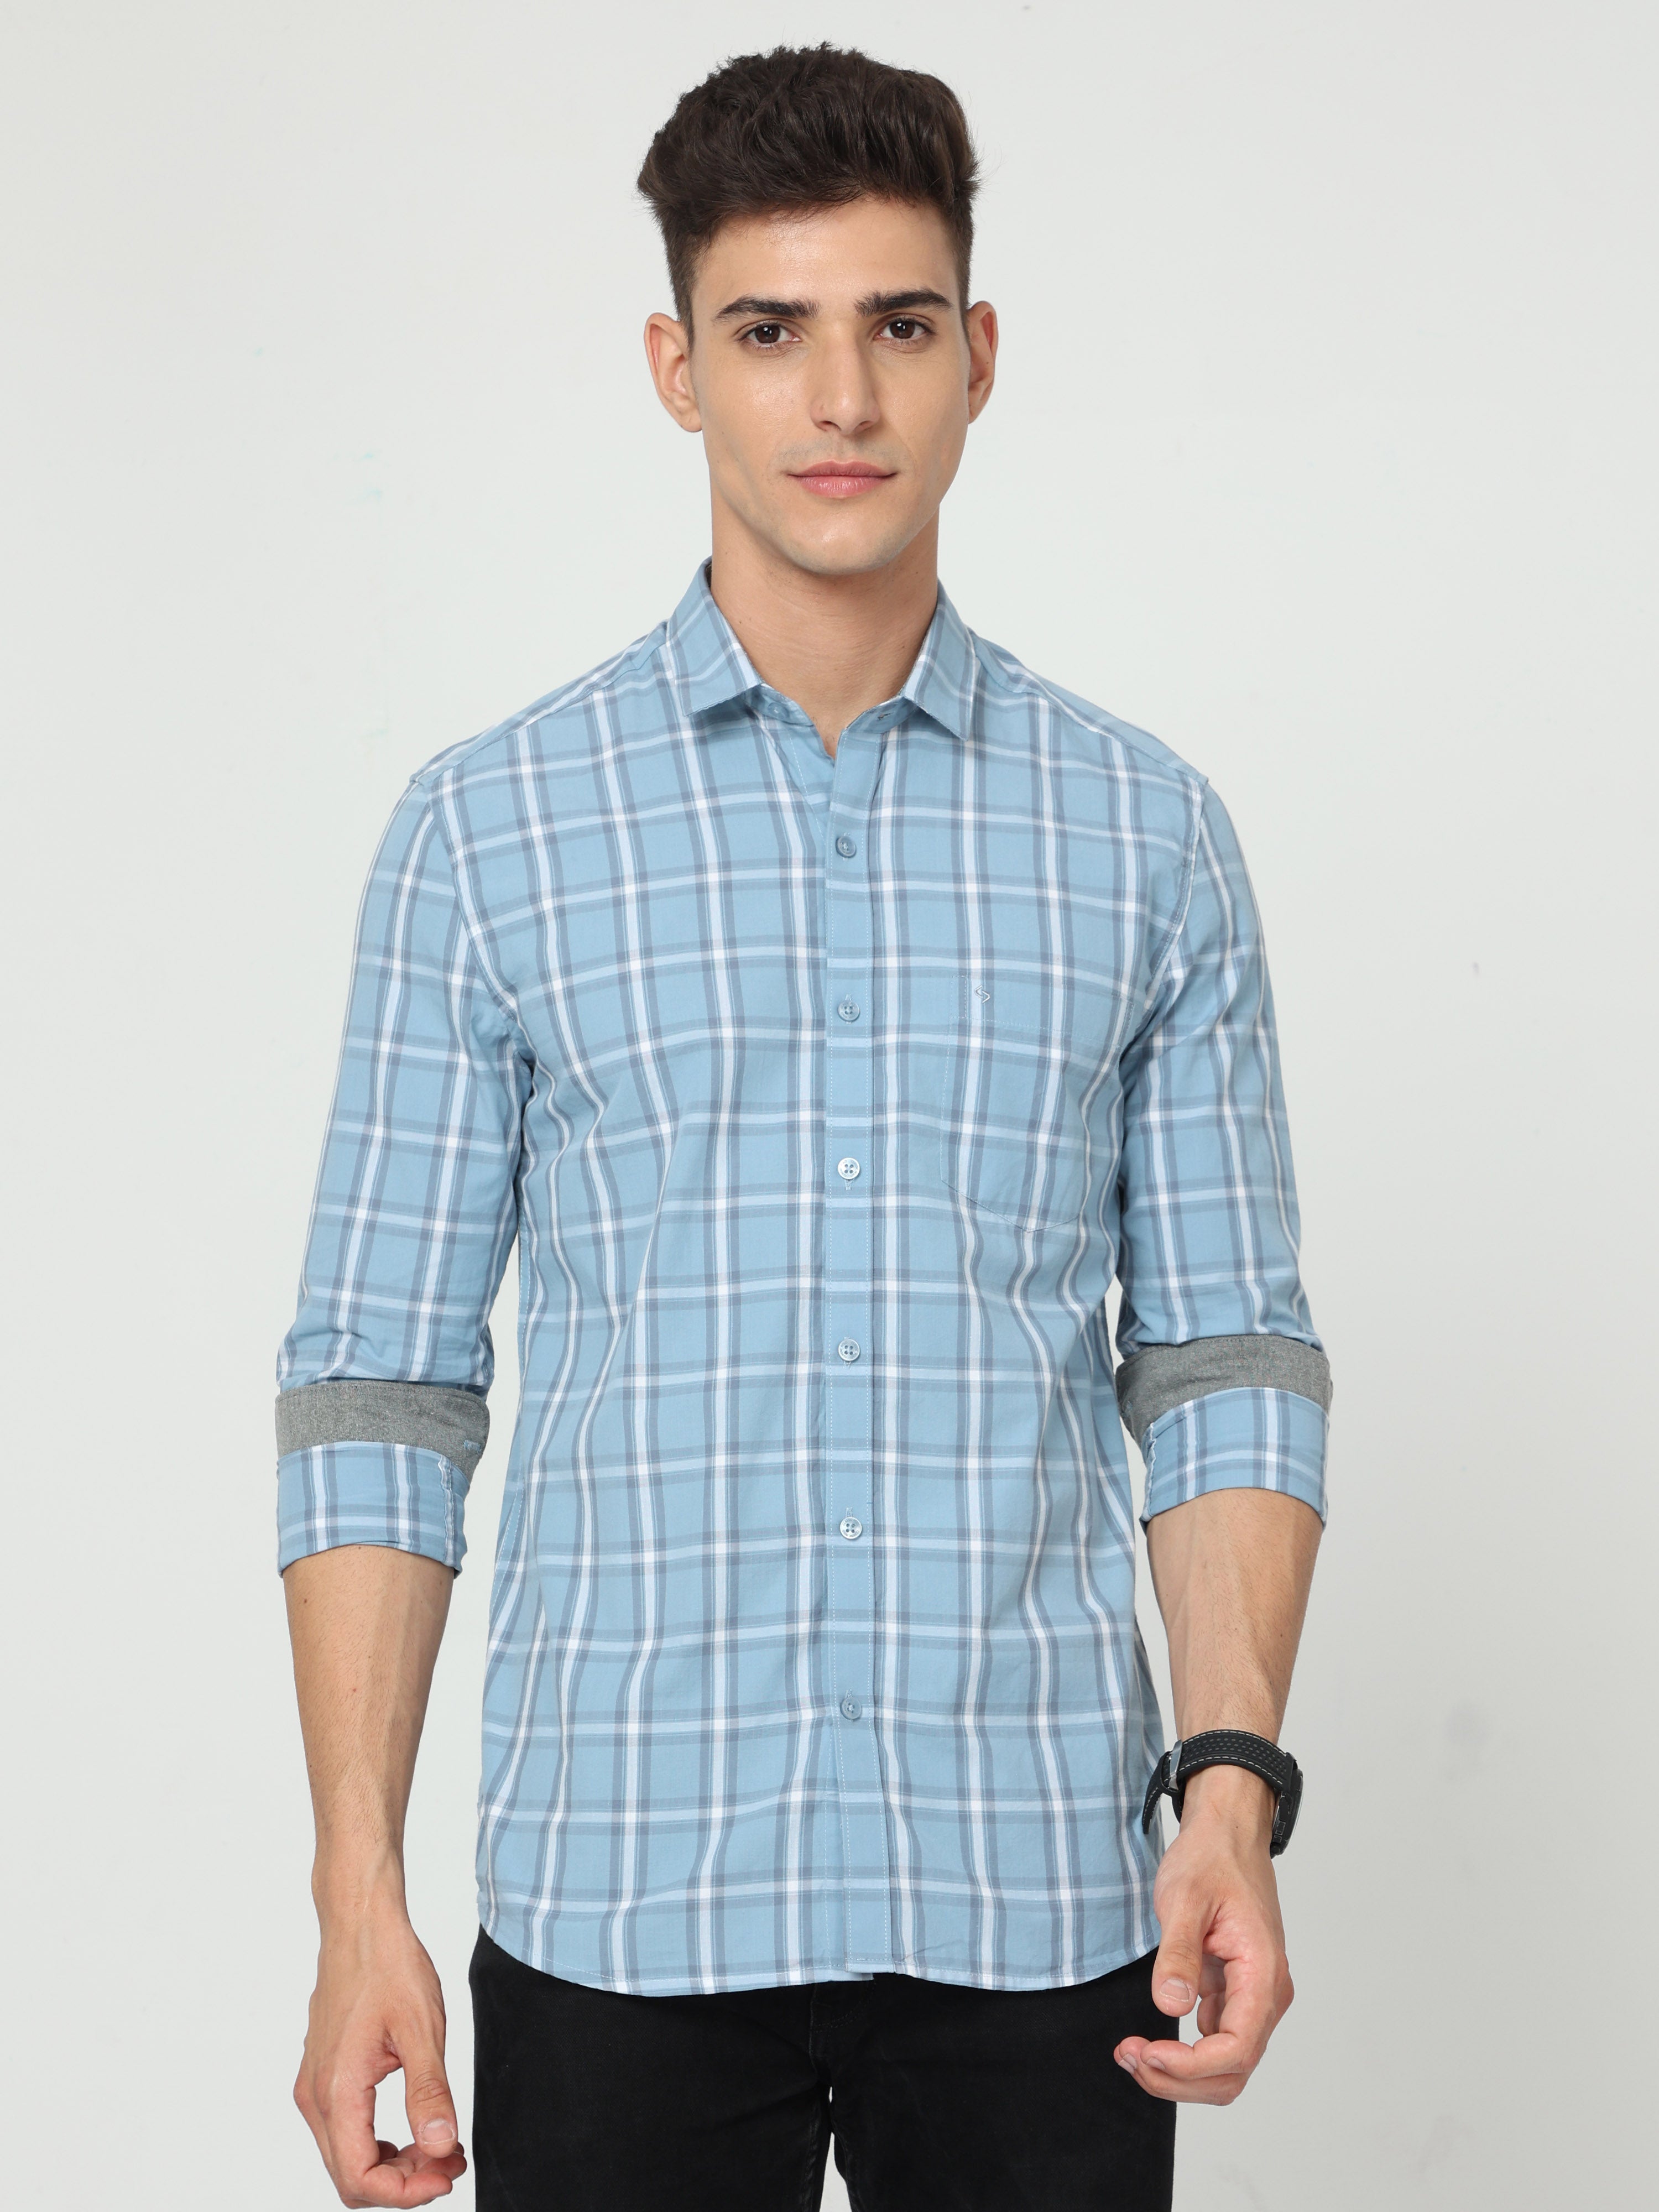 Slim fit checked shirt with 30% discount!